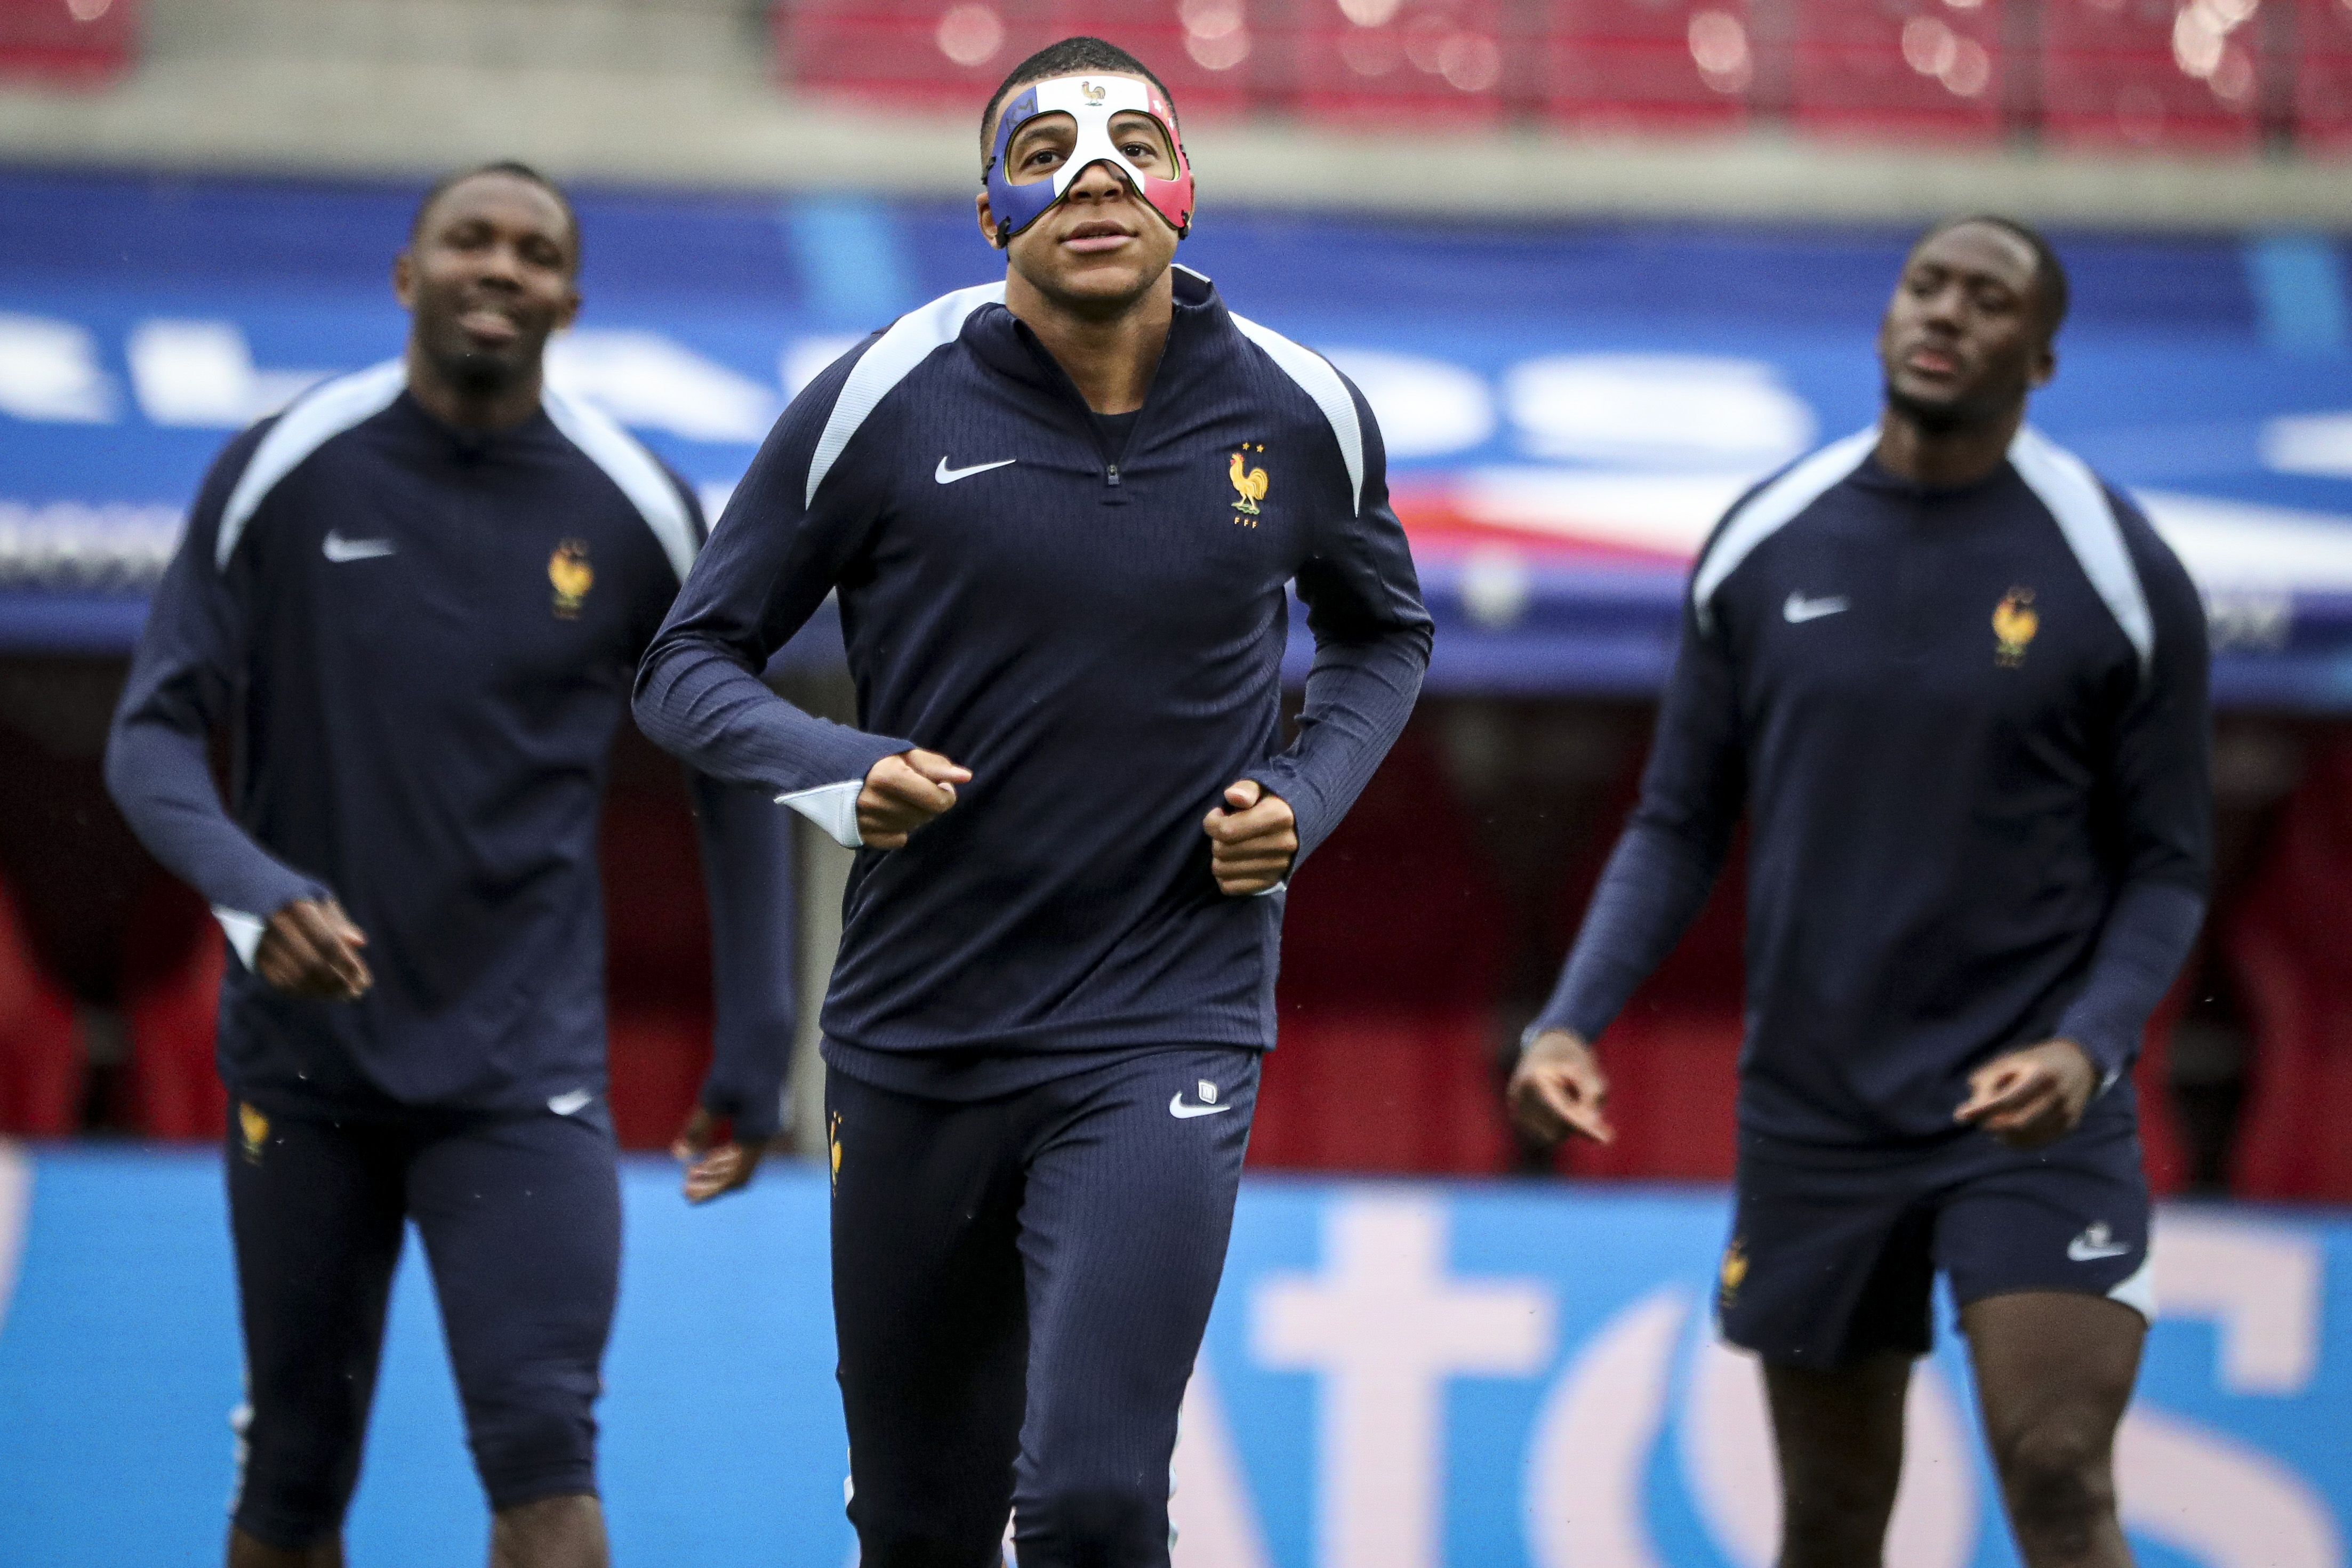 aa-20240620-34929325-34929318-french-national-team-trains-in-germany-ahead-of-uefa-euro-2024-match-against-netherlands.jpg